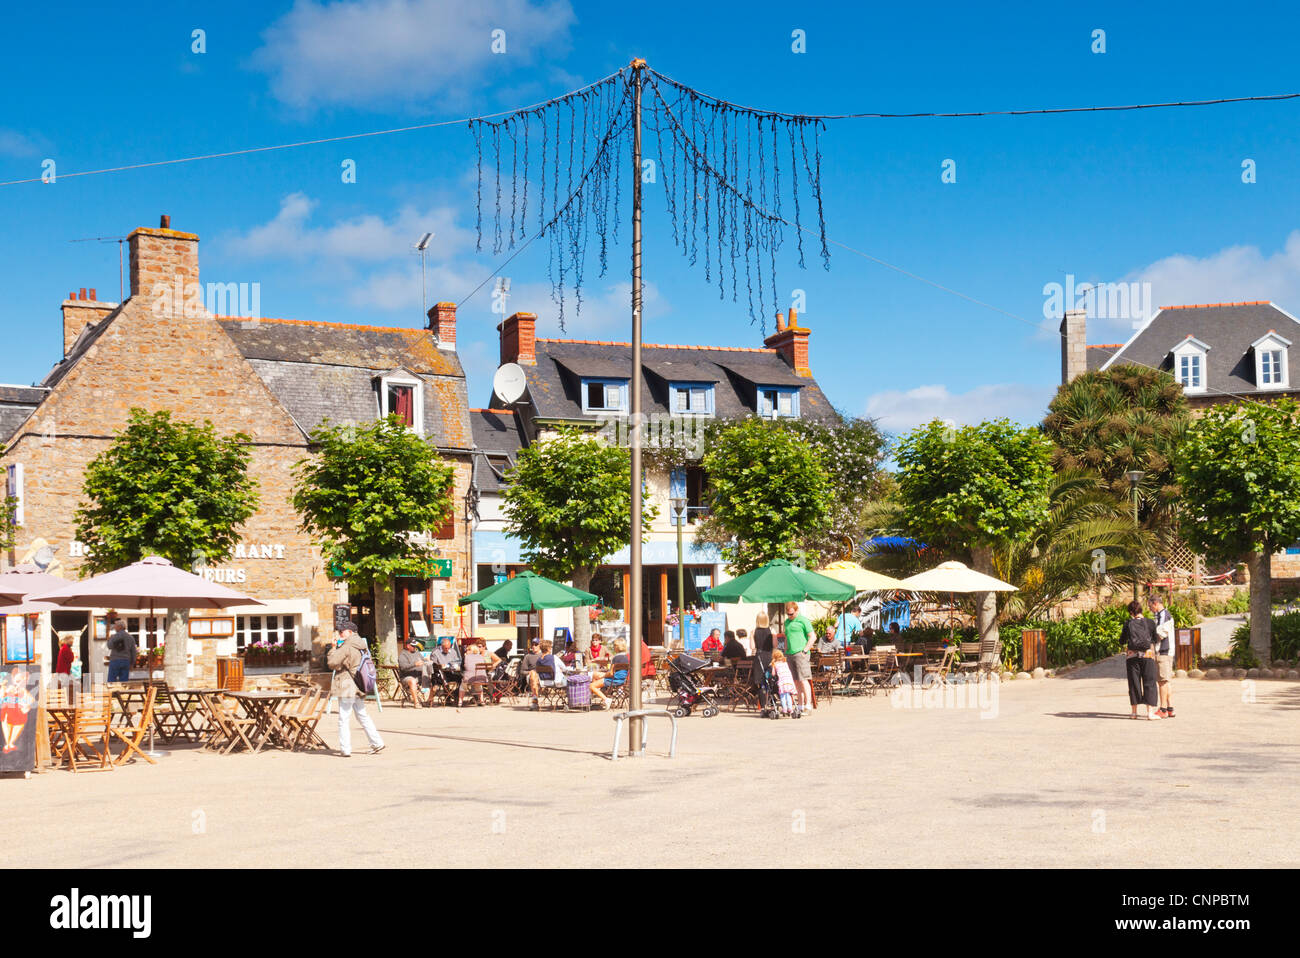 The town centre of Ile de Brehat, Brittany, France, with its restaurants and cafes. Stock Photo